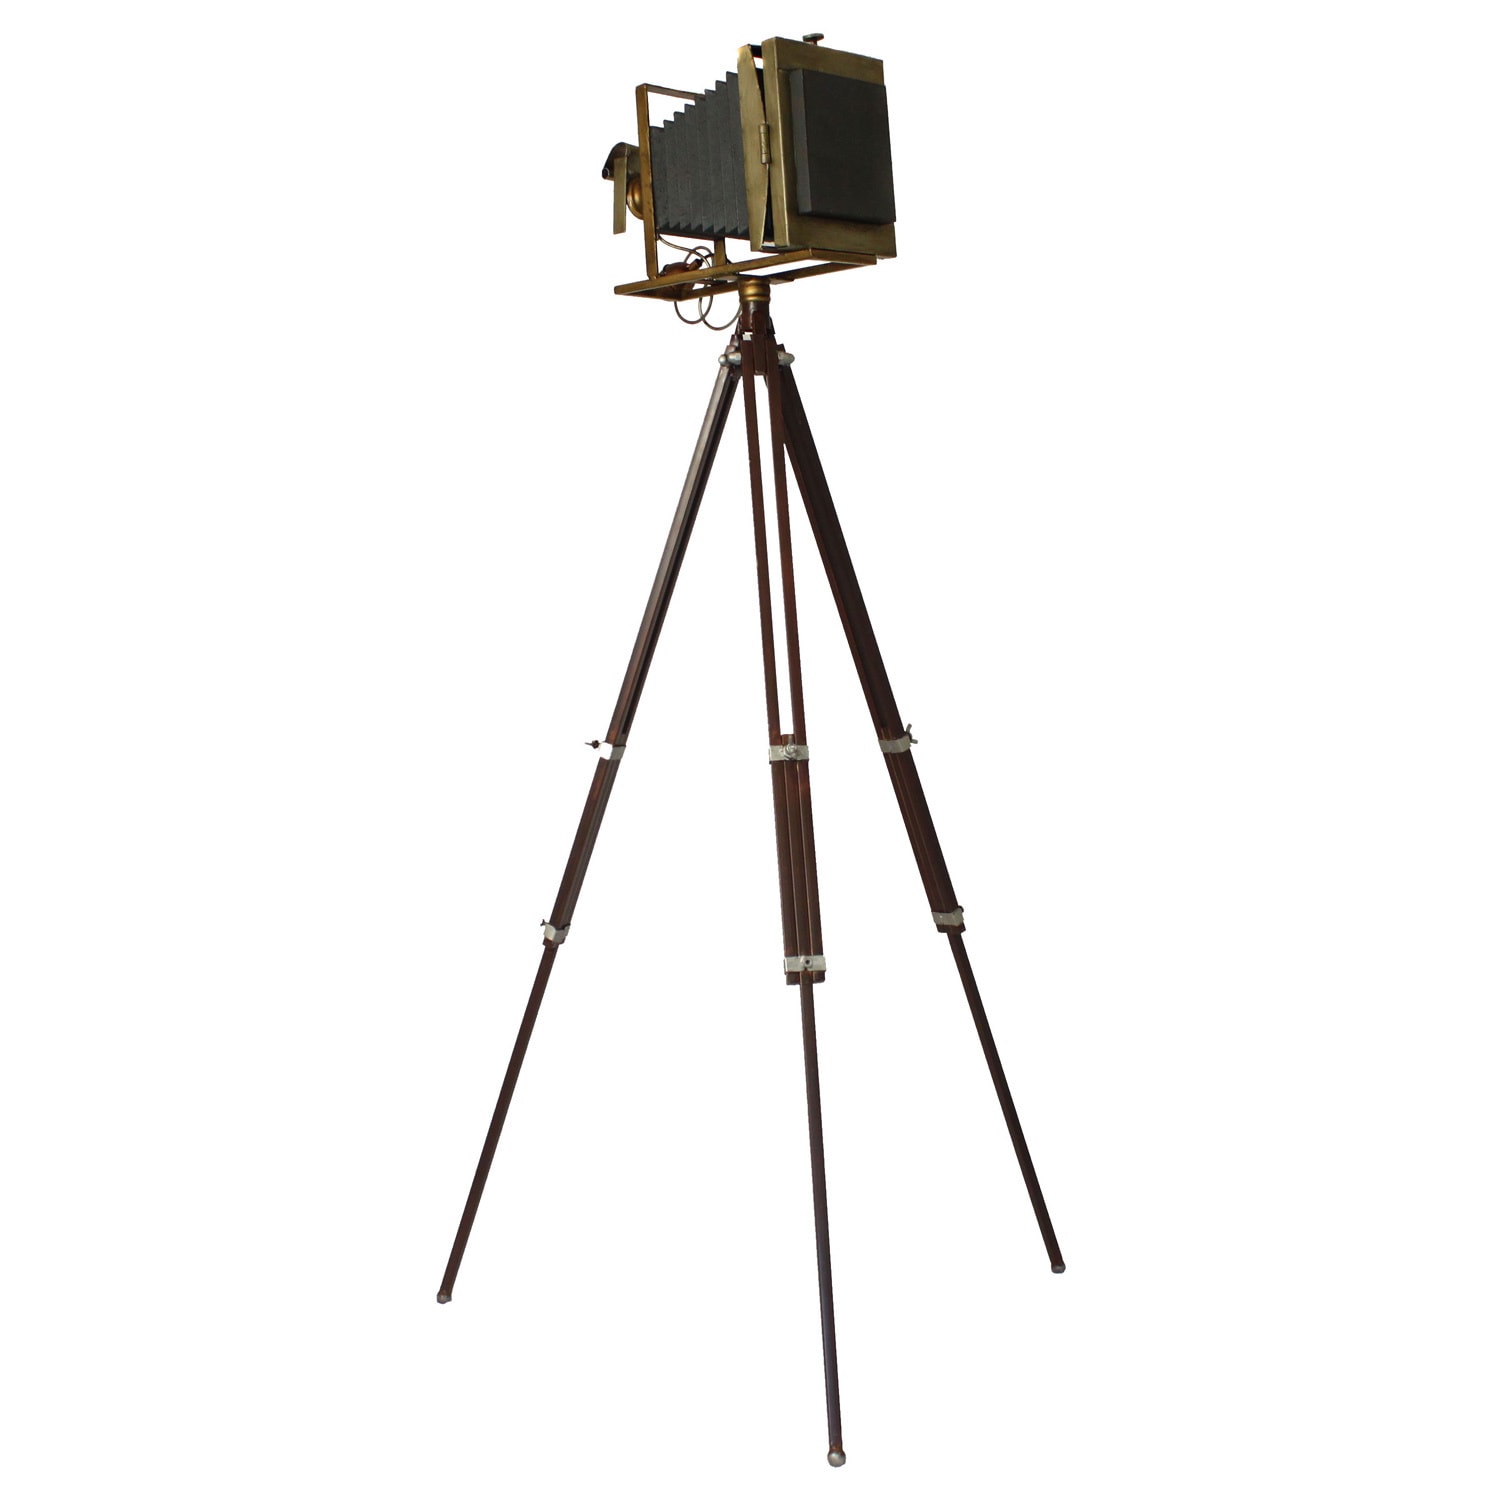 Vintage 19th Century Tripod Camera Accent Home Decor (Brown with brass accents Materials Wood/ metalDimensions 56.5 inches high x 24 inches wide x 24 inches long )